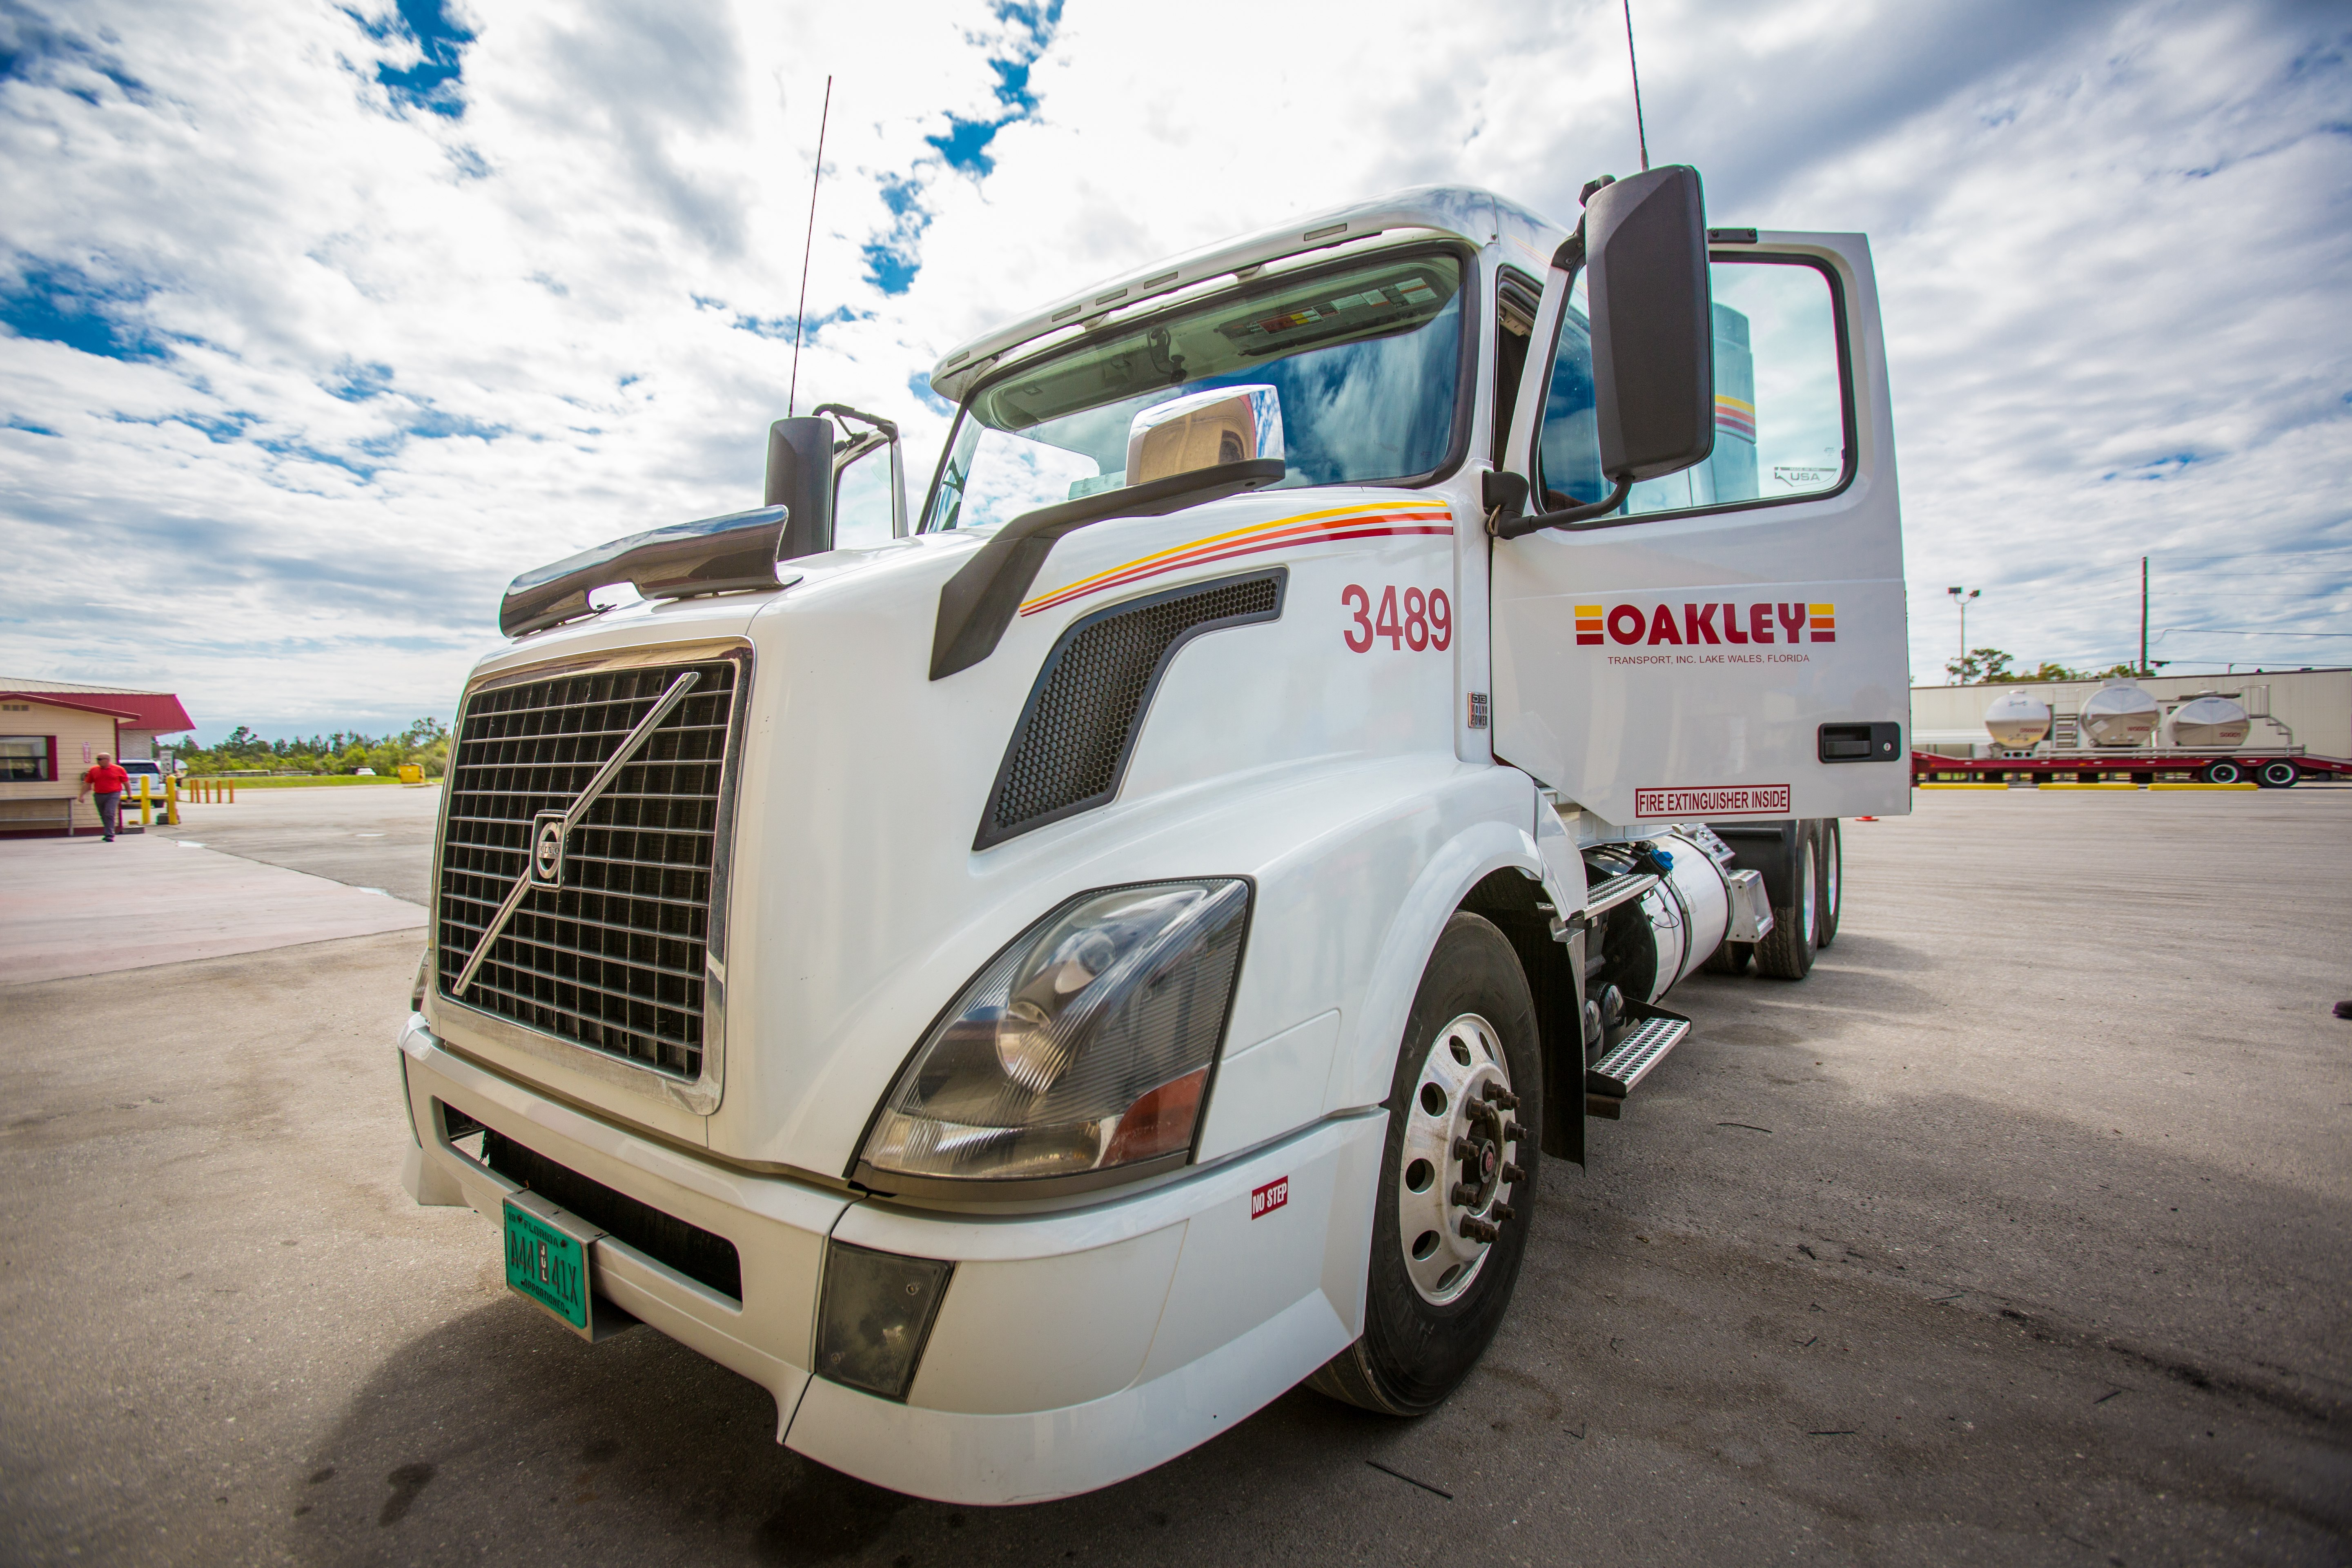 Oakley Transport, Inc. Taps SmartDrive Safety Platform to Improve Fleet Safety and Exonerate Drivers | Omnitracs